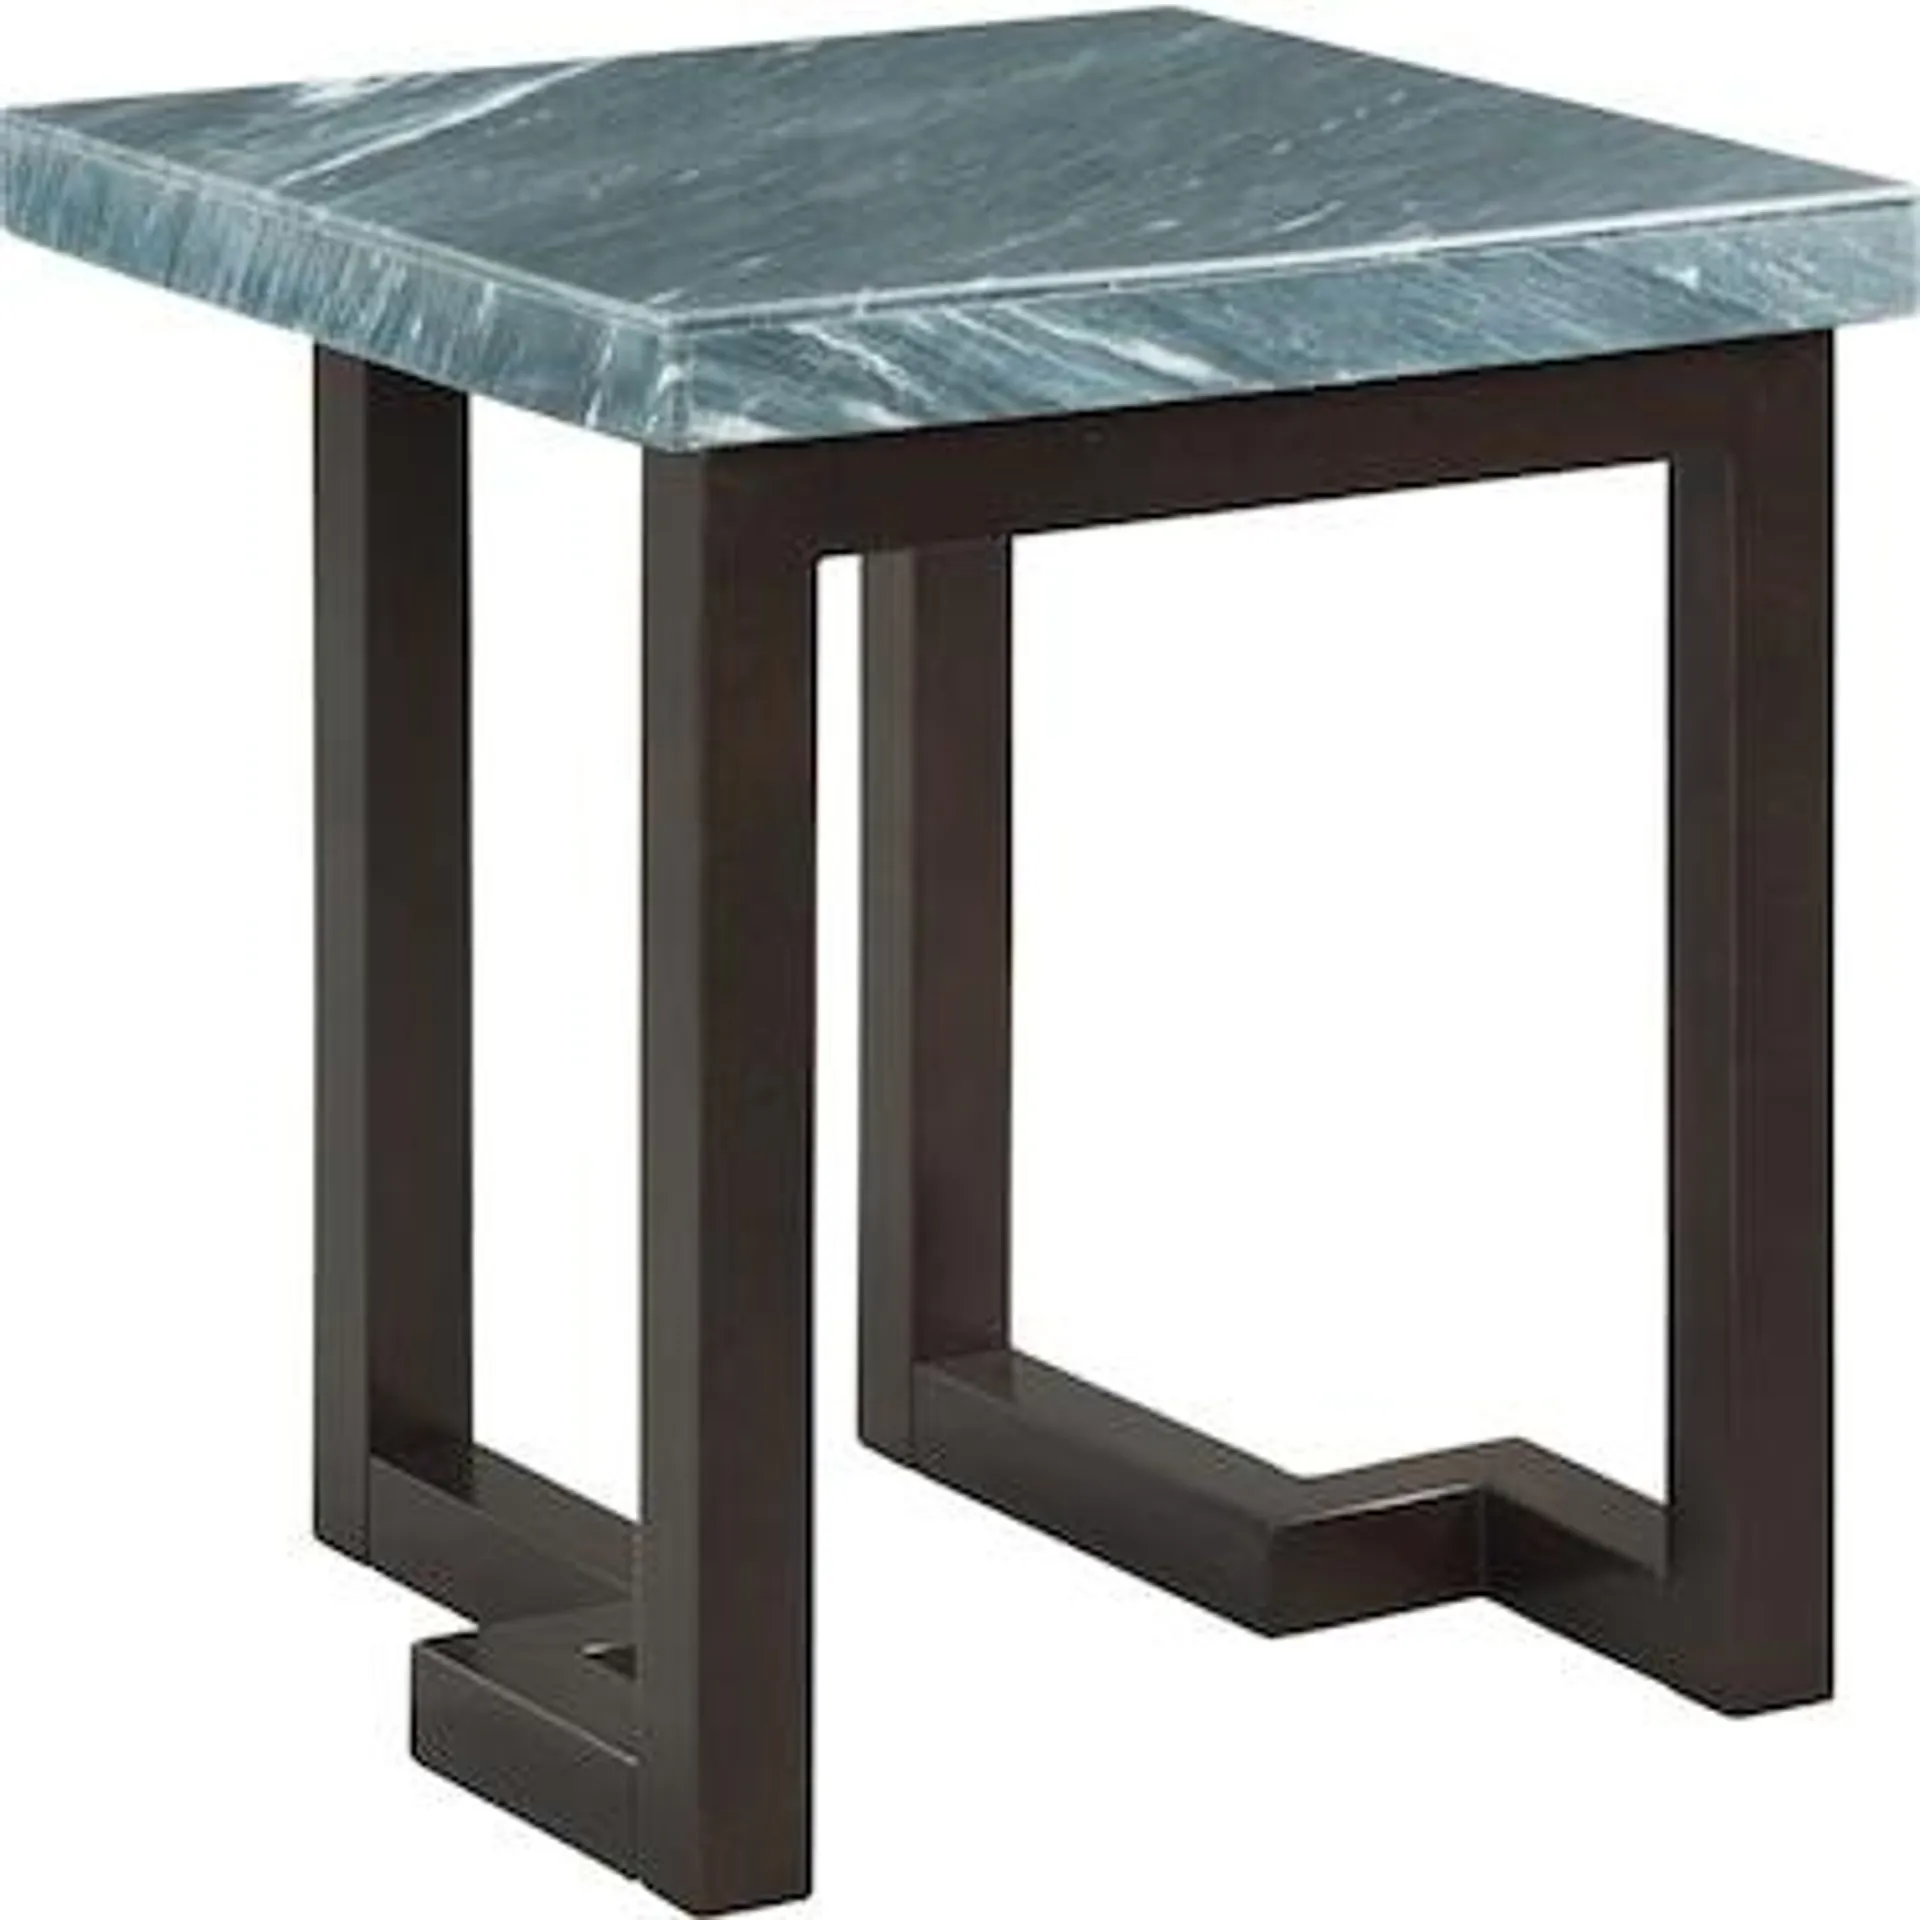 Joni Marble Square End Table - Gray